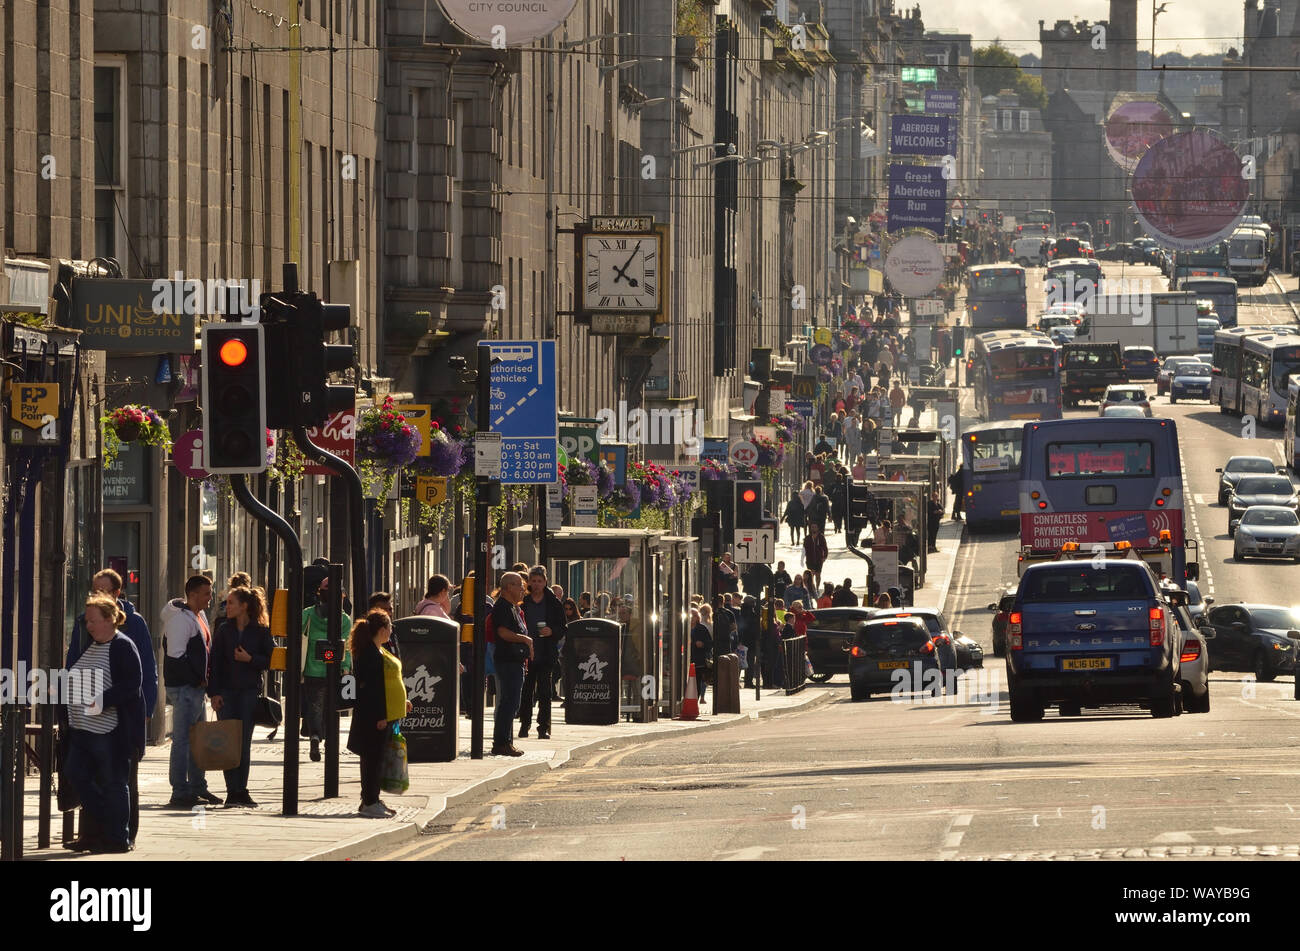 A typical British 'high street' scene in 2019 with shoppers and traffic on Union Street in Aberdeen city centre, Scotland. Stock Photo